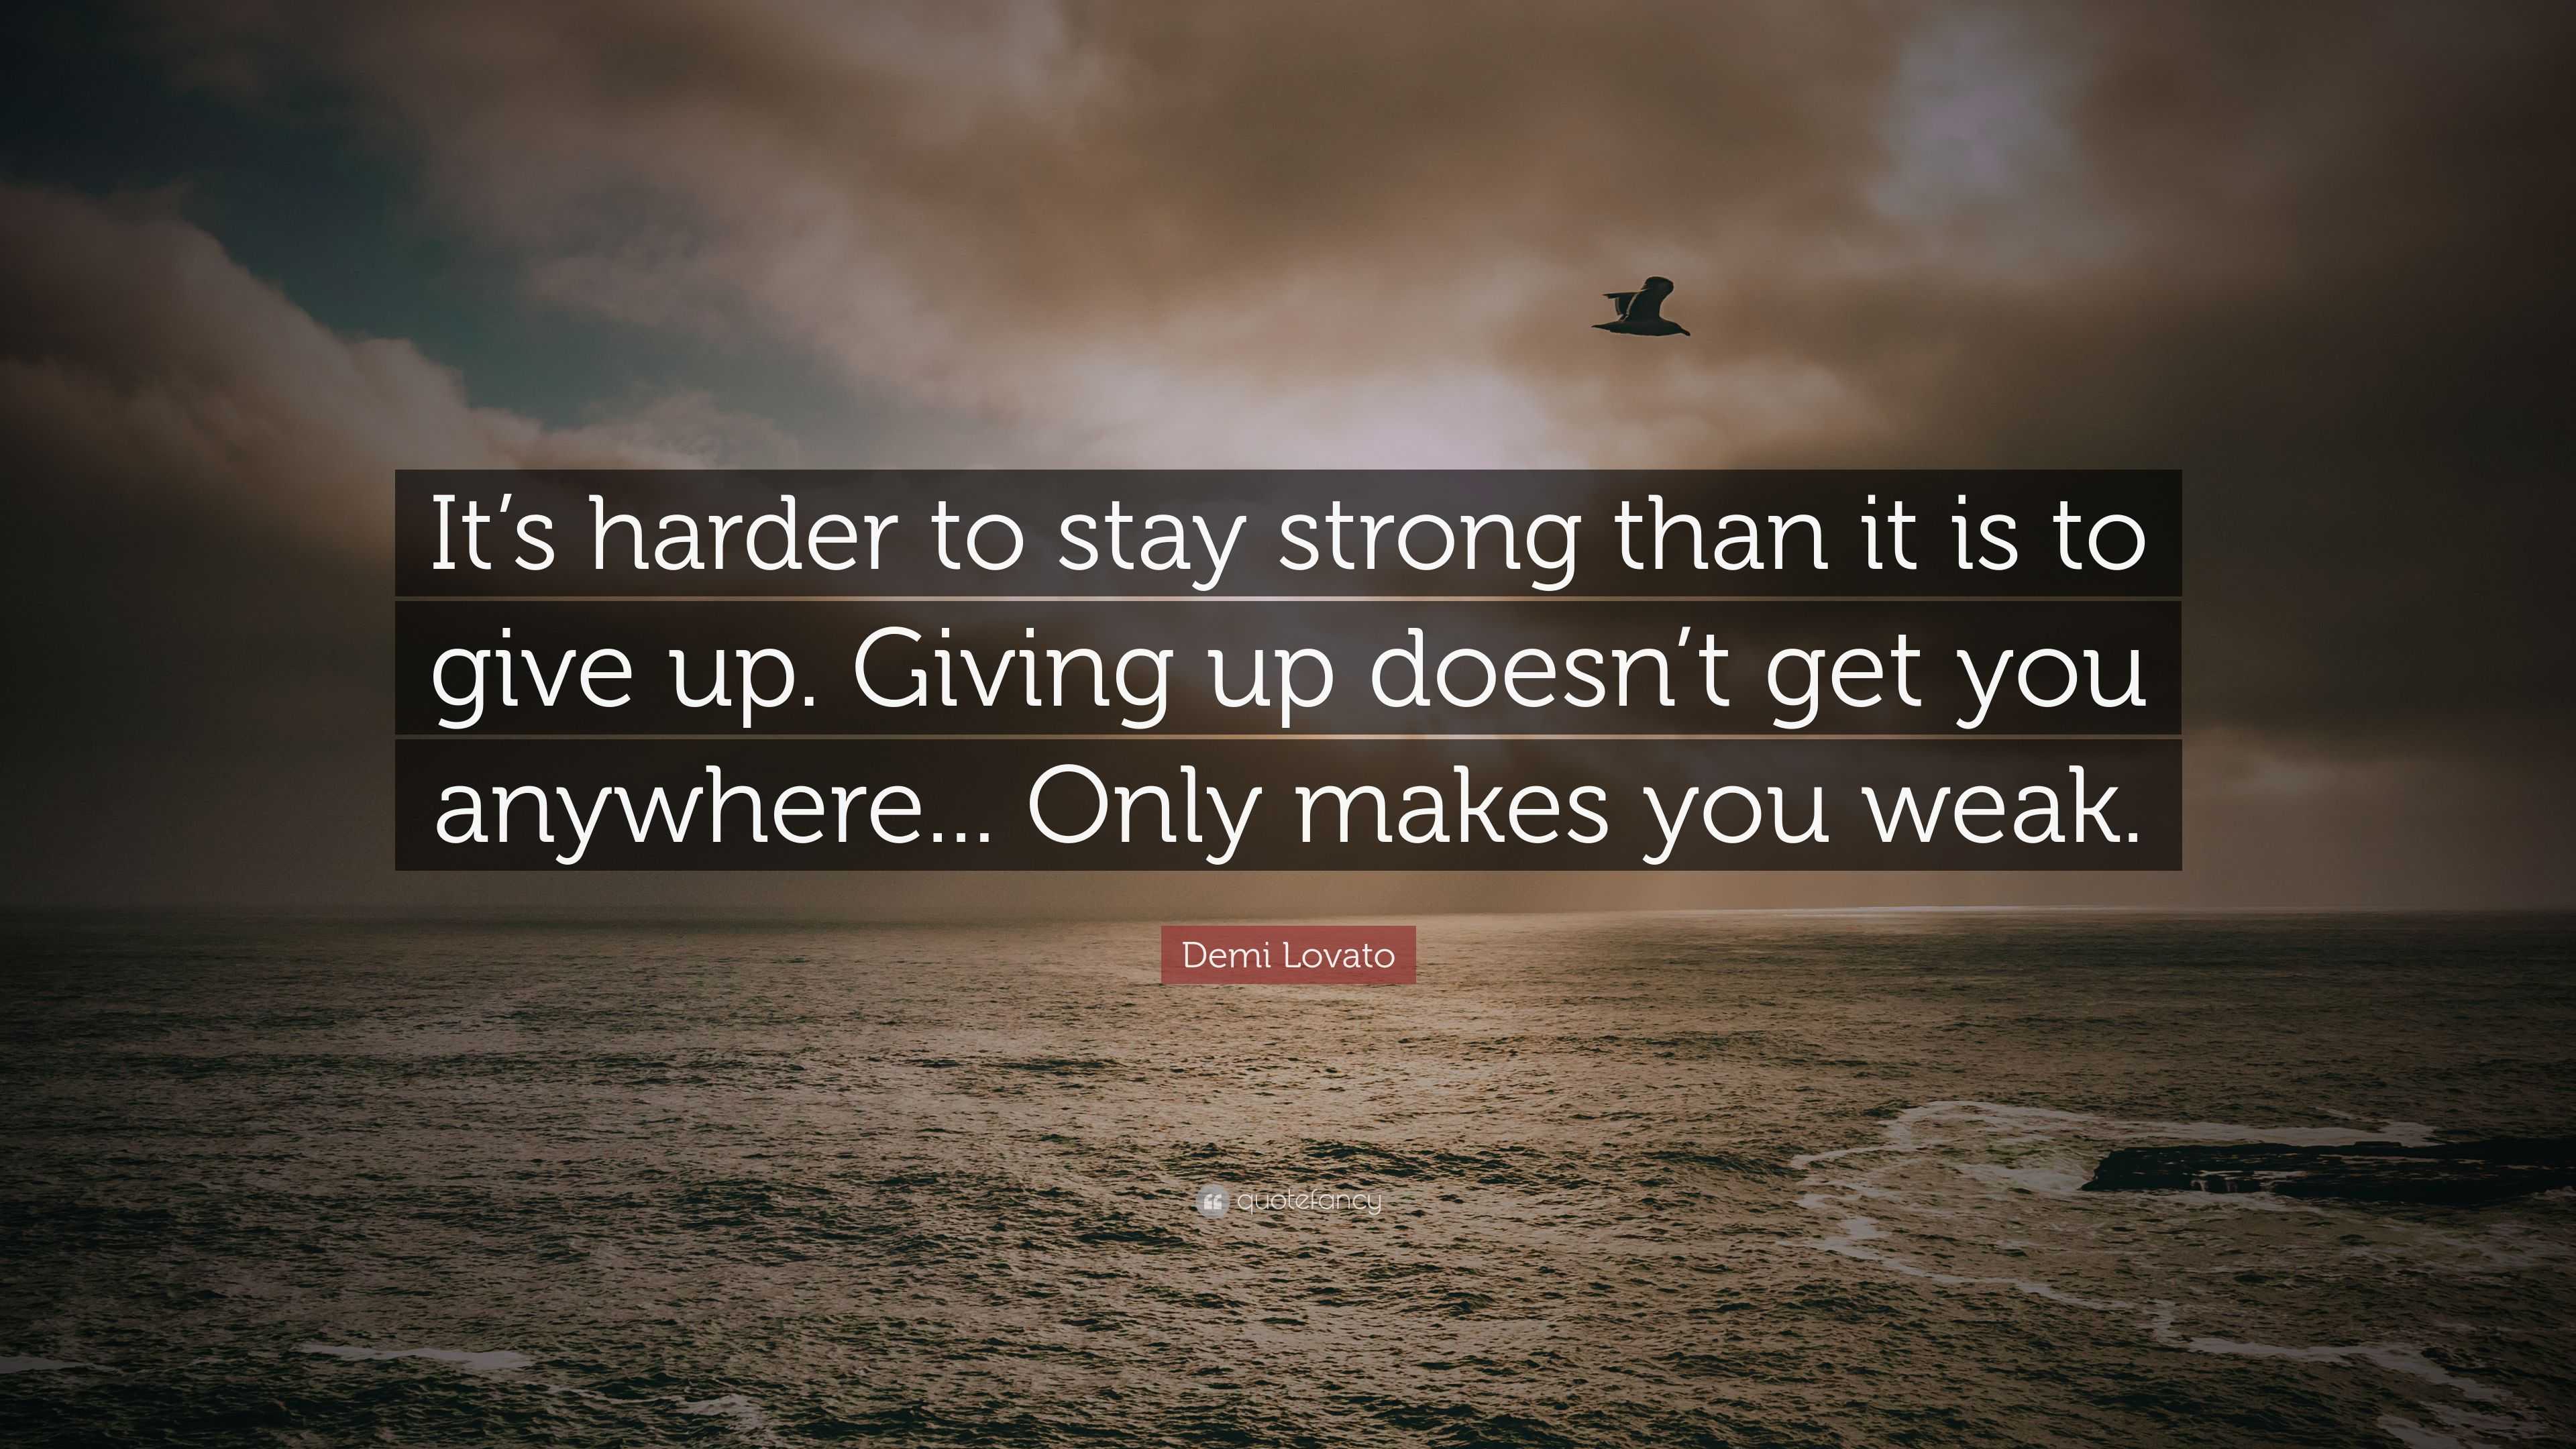 Demi Lovato Quote: “It’s harder to stay strong than it is to give up ...